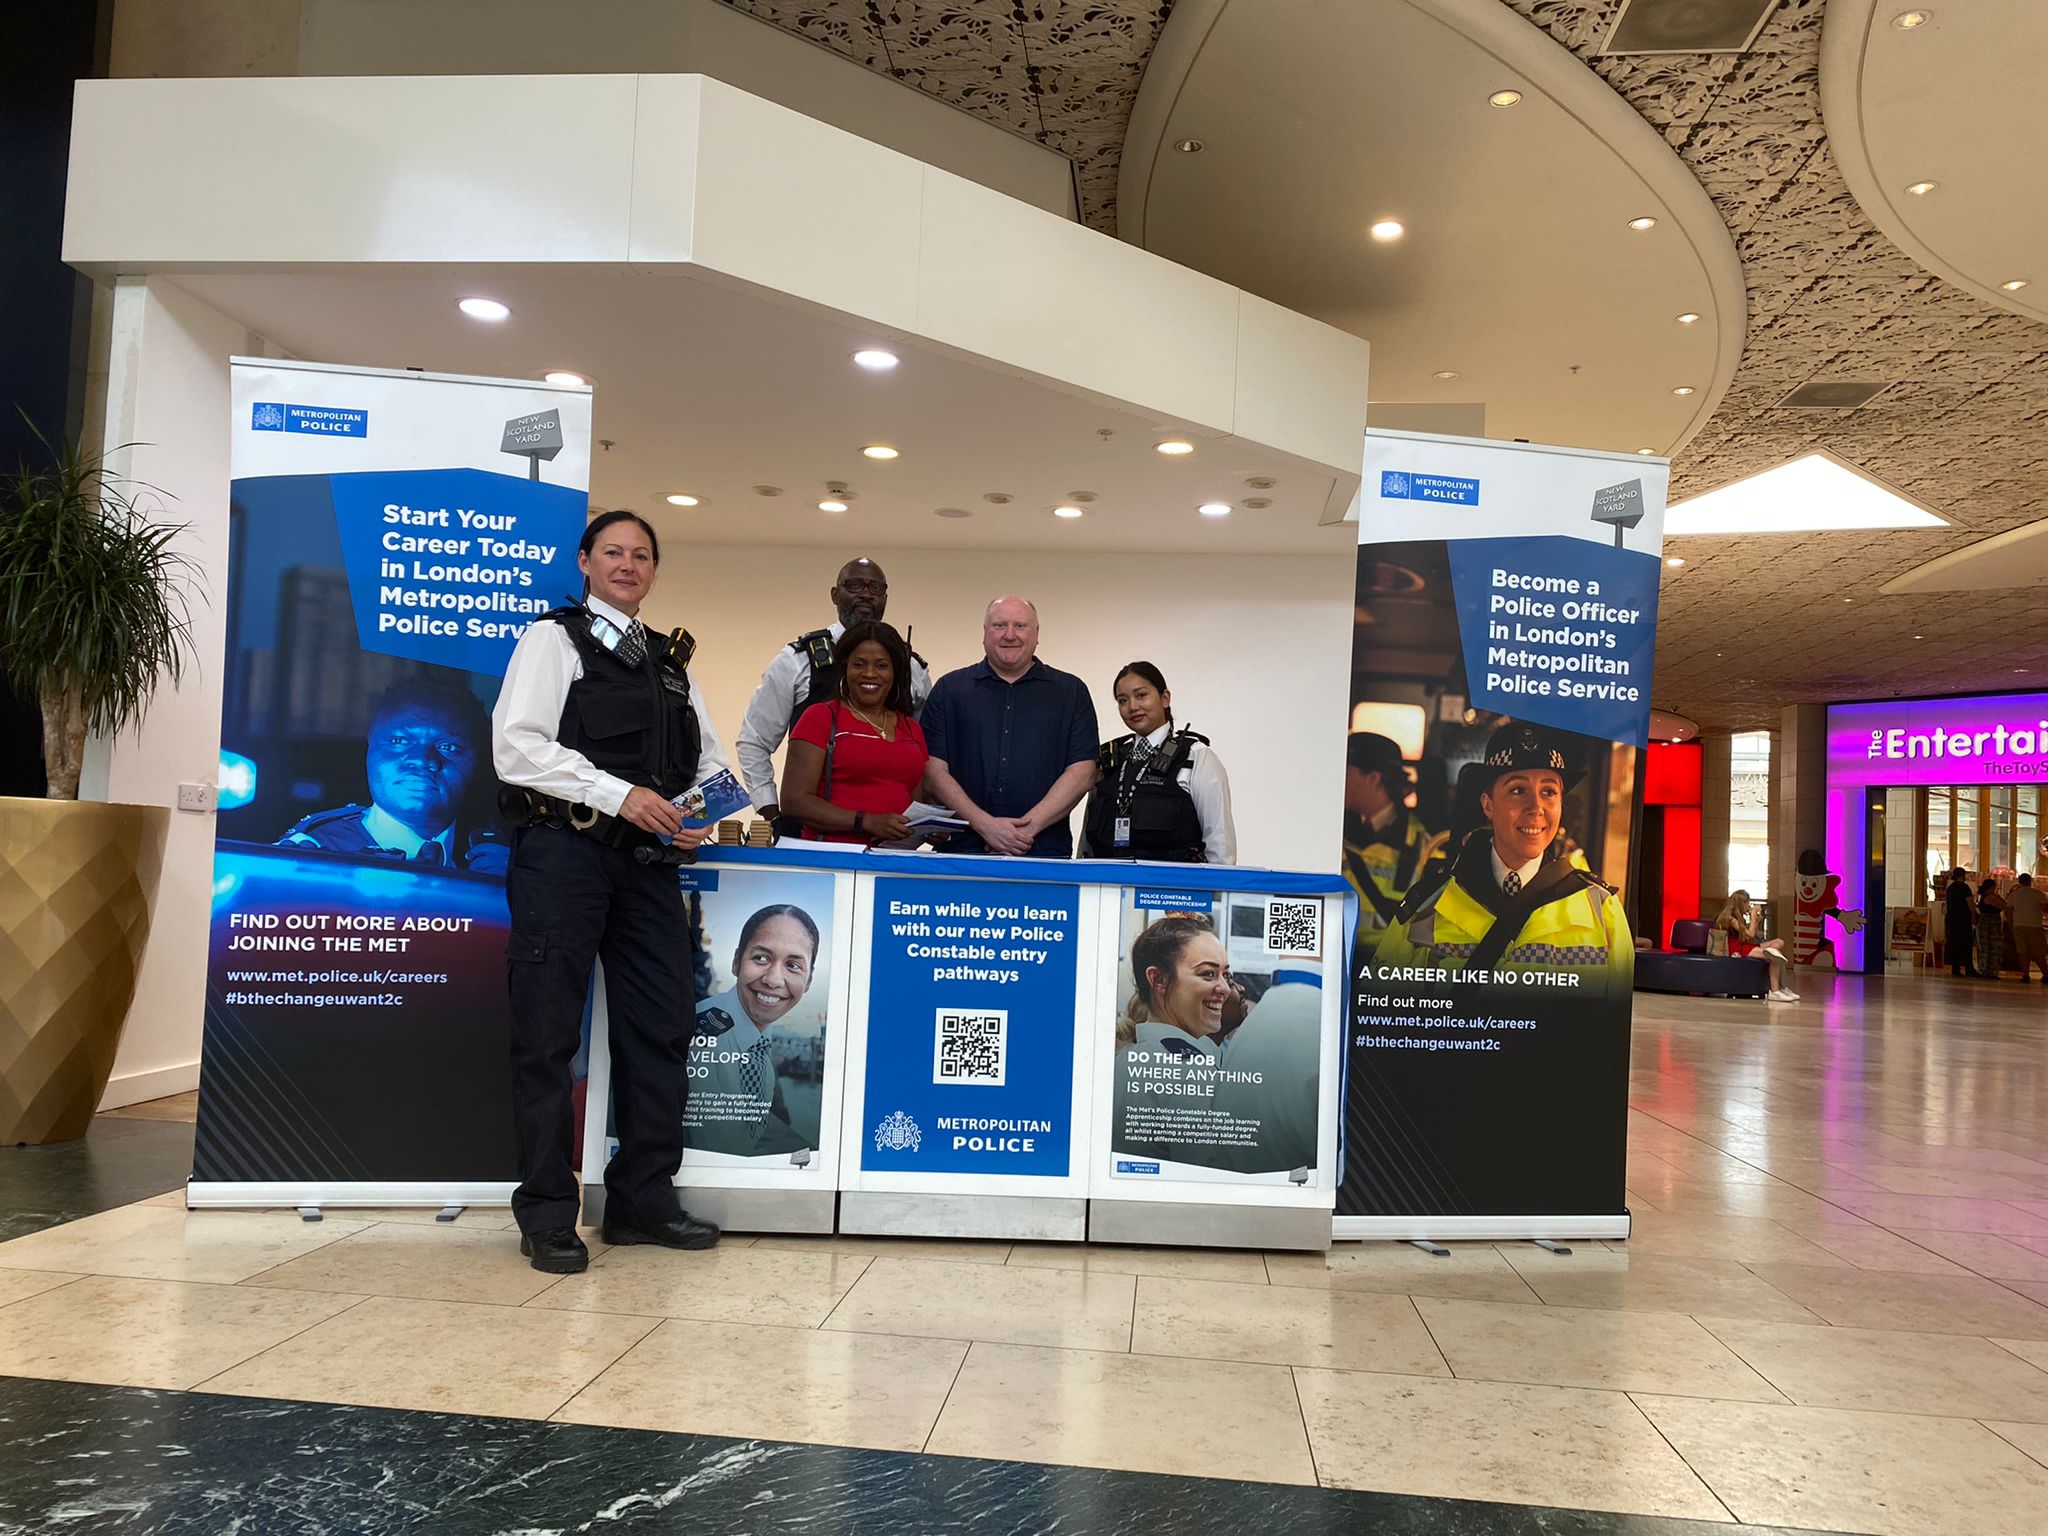 A team of four Metropolitan Police officers standing on their recruitment stand inside a shopping centre.